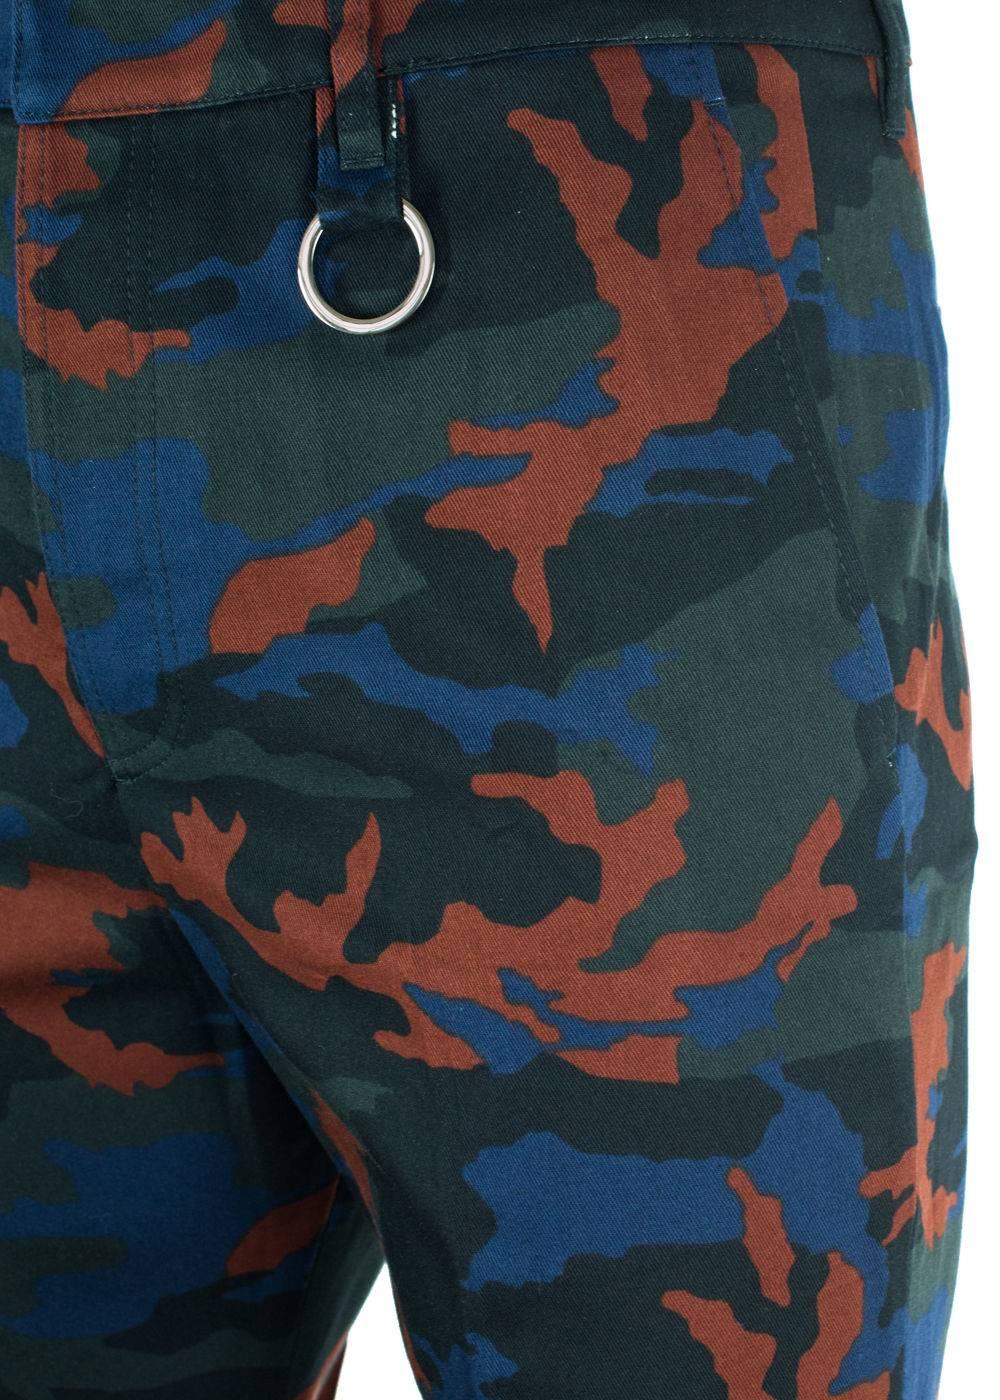 Brand New Givenchy Men's Corduroys
Original Tag
Retails in Stores & Online for $565
Men's Size EU50 / US34 Fits True to Size

Camouflage pattern has been the ongoing trends in the past couple of years. Made with 100% Cotton, these pants are super